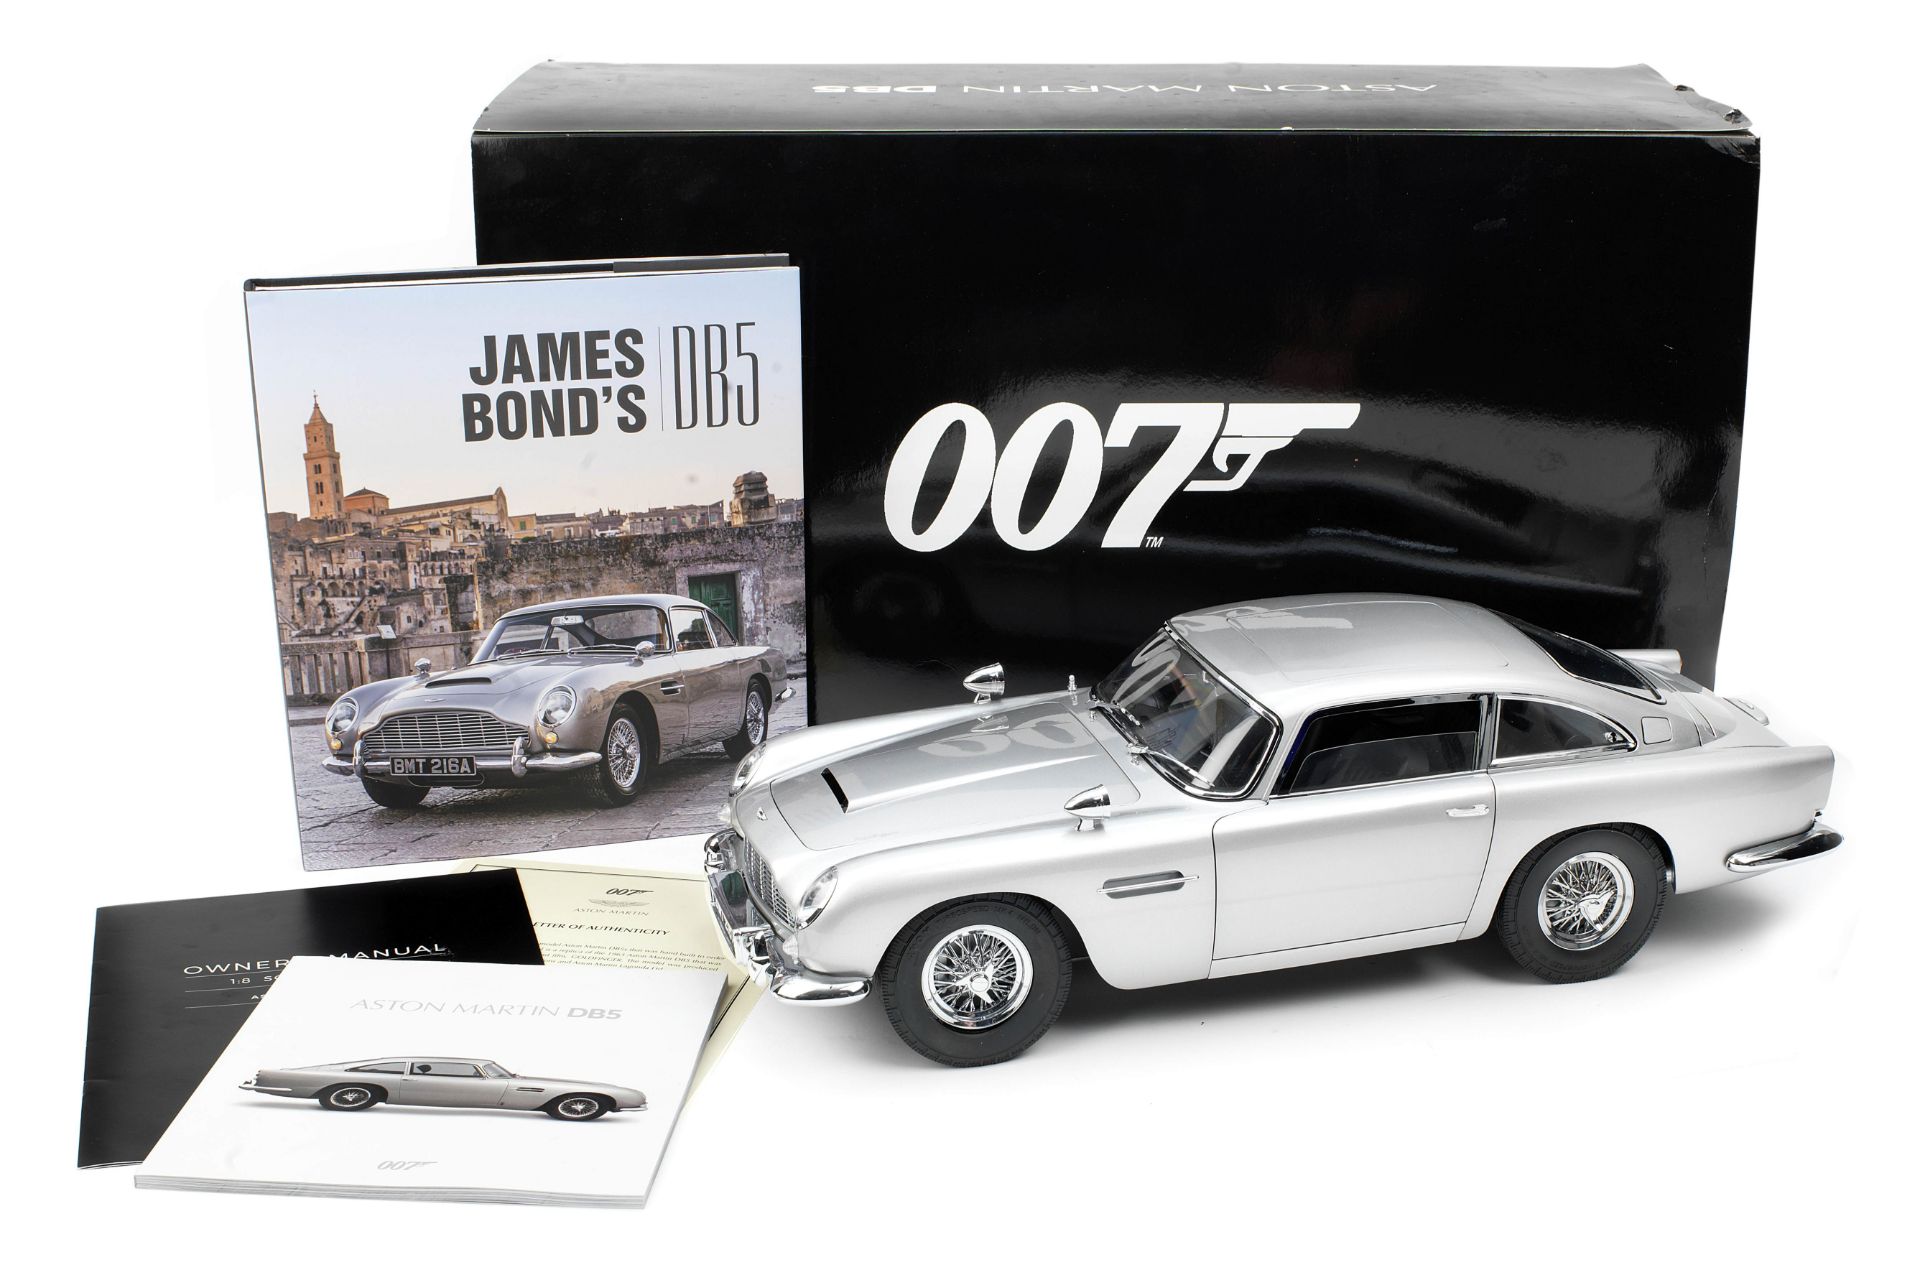 A finely detailed 1:8 scale model of the James Bond 'Goldfinger' Aston Martin DB5 constructed by ...